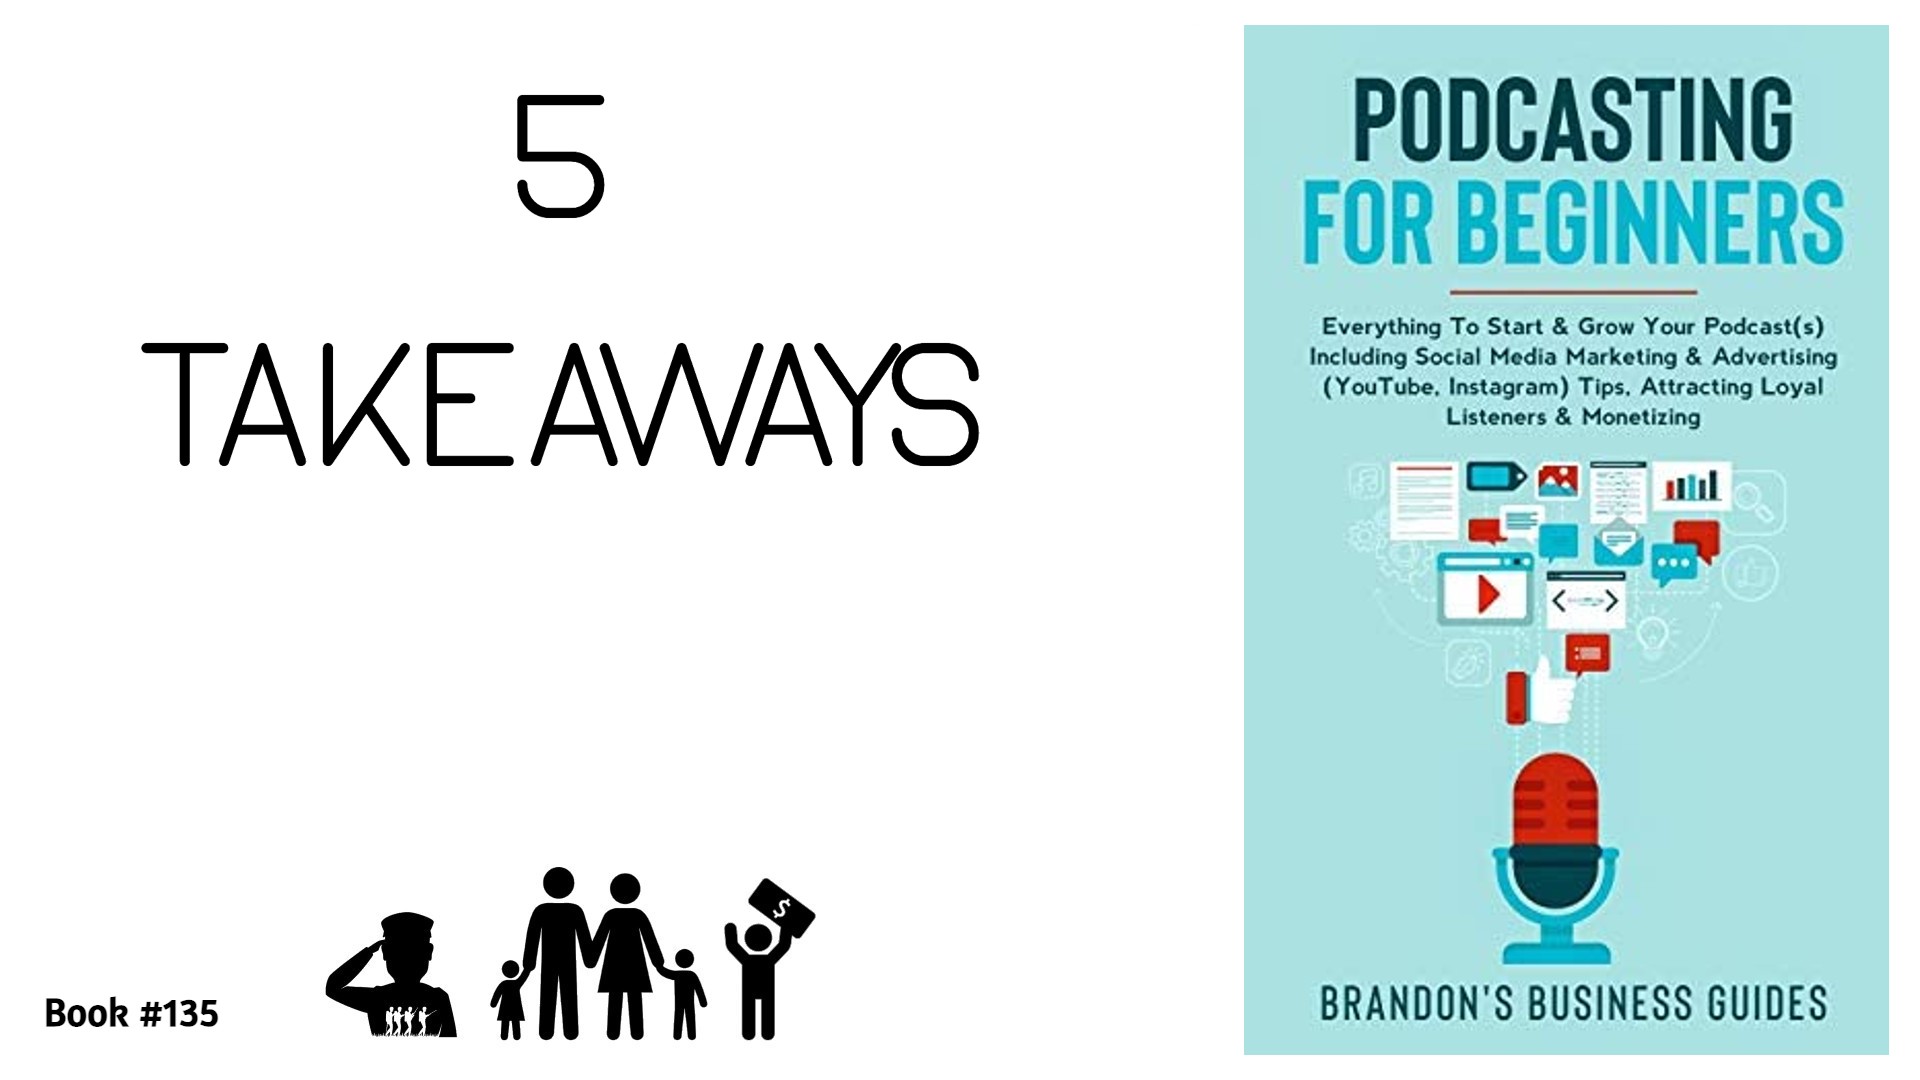 5 Takeaways from “Podcasting for Beginners”